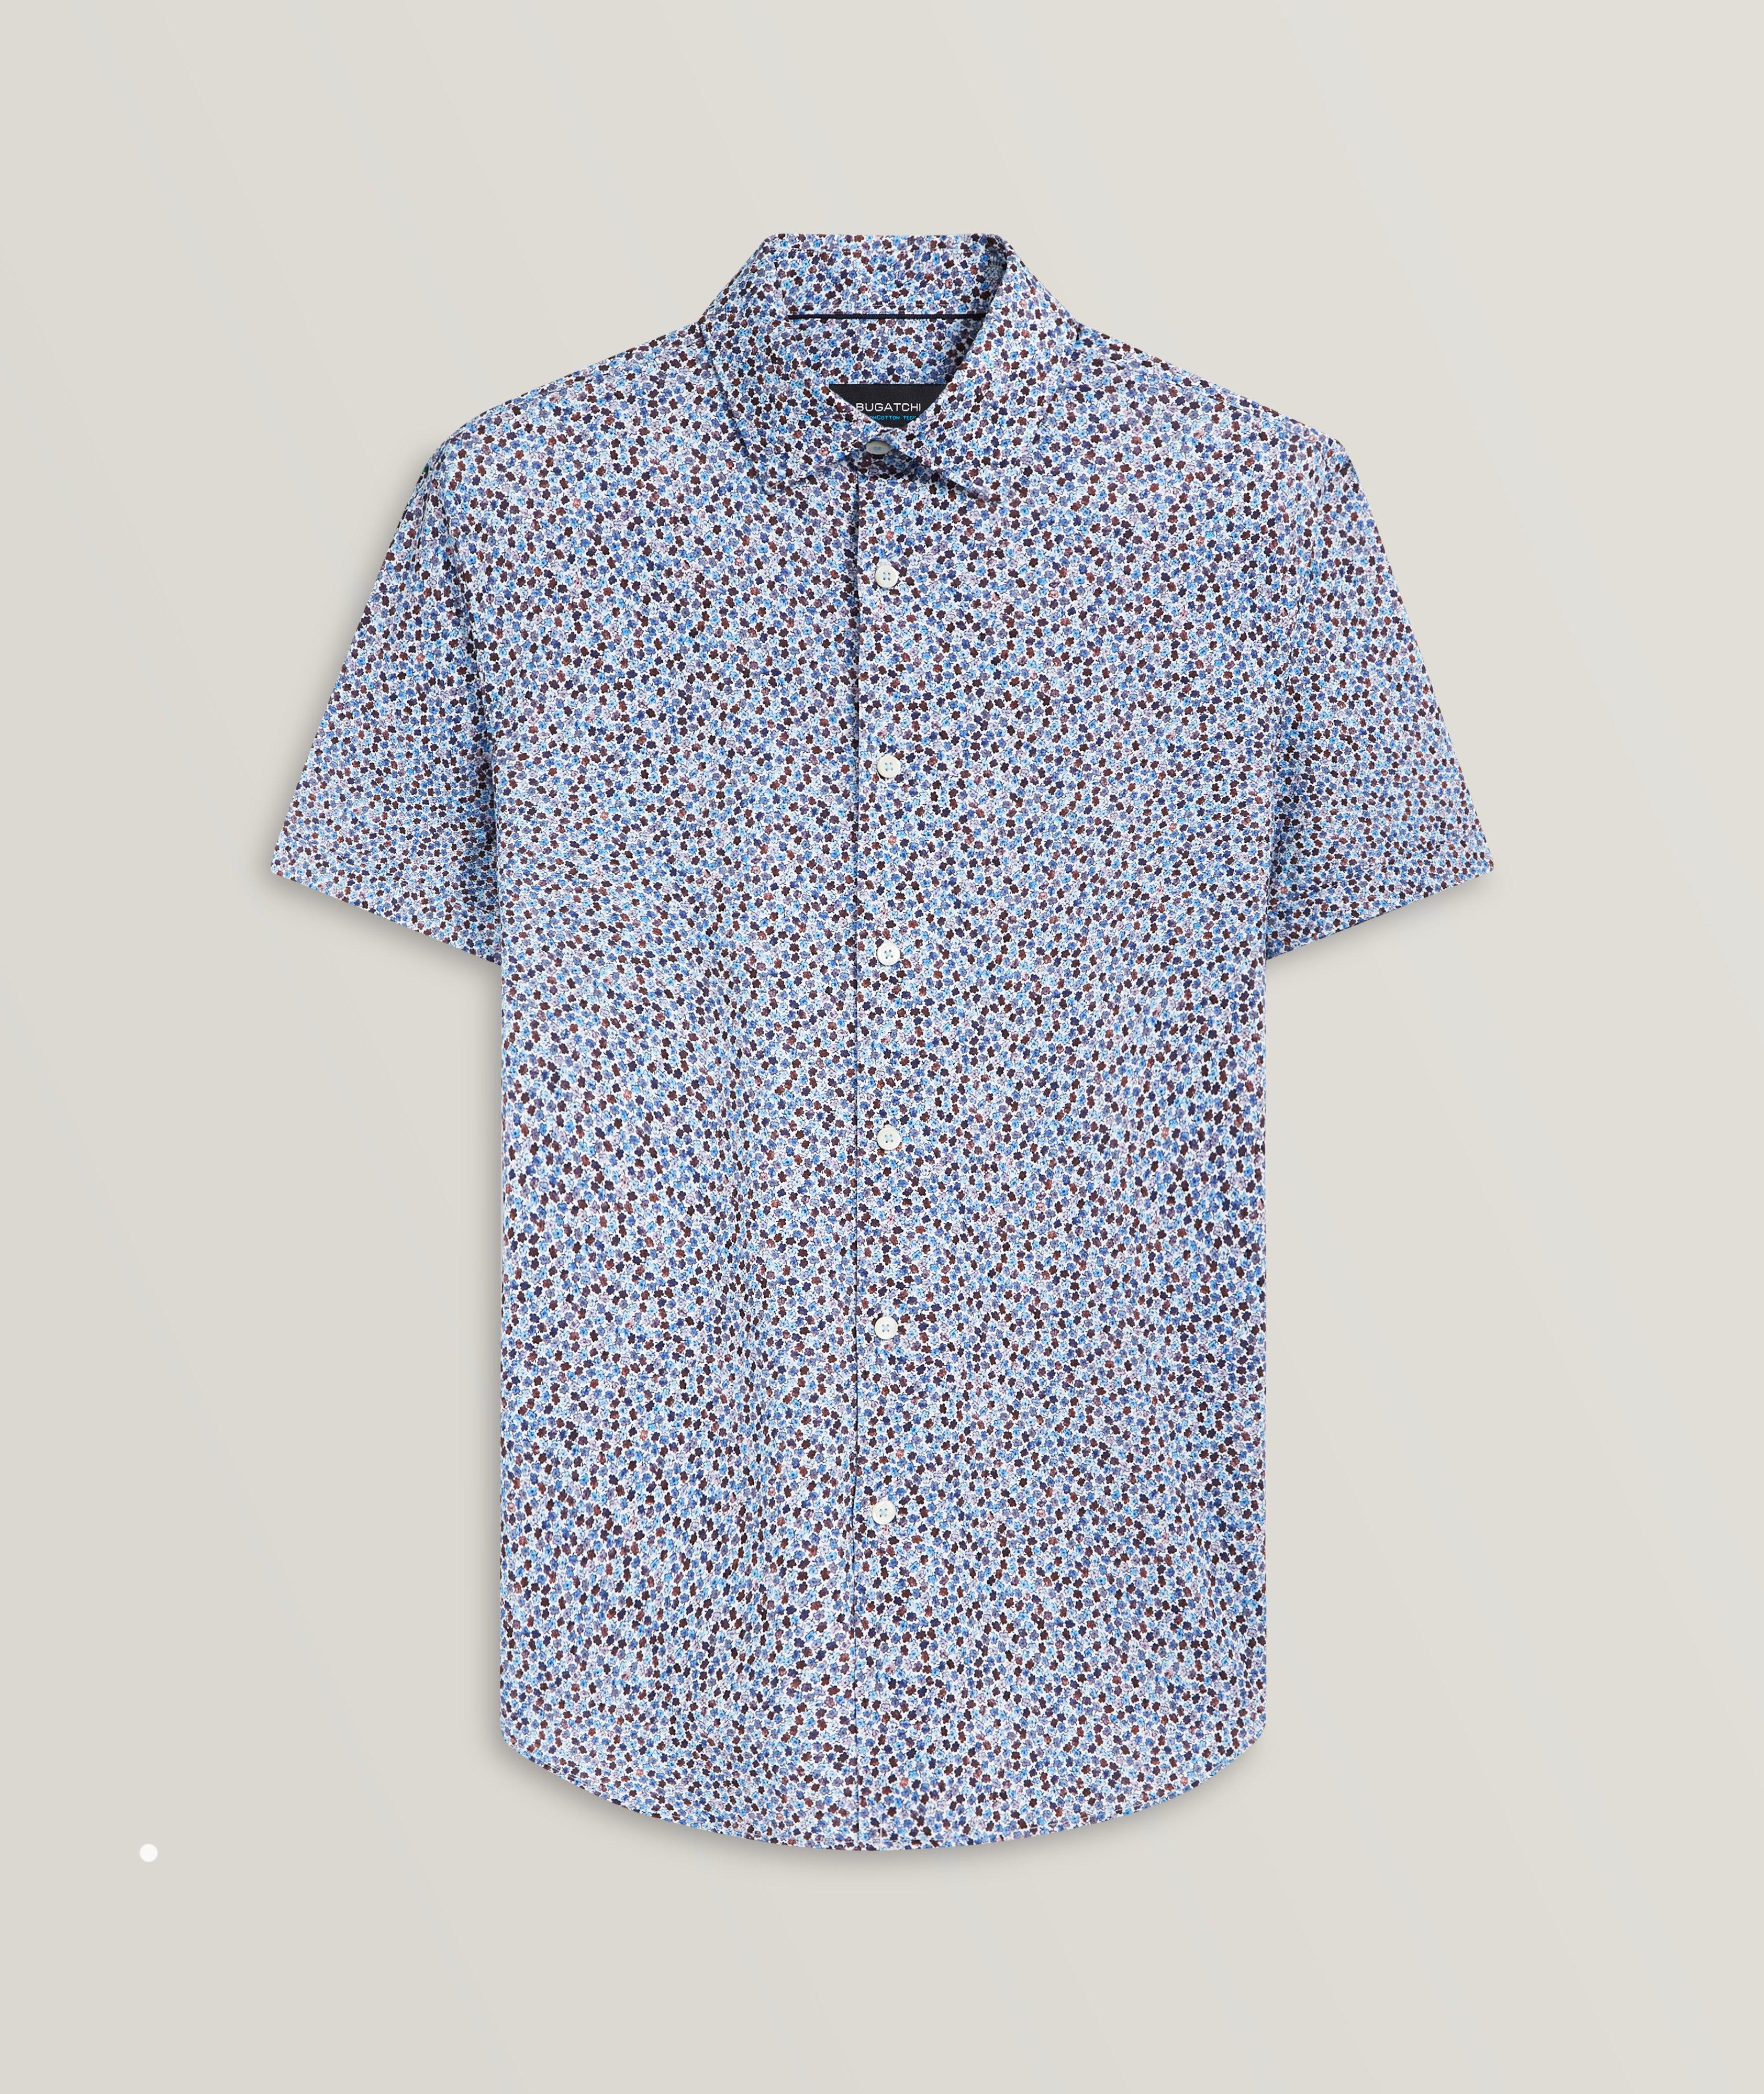 Miles Floral OoohCotton Sport Shirt image 0